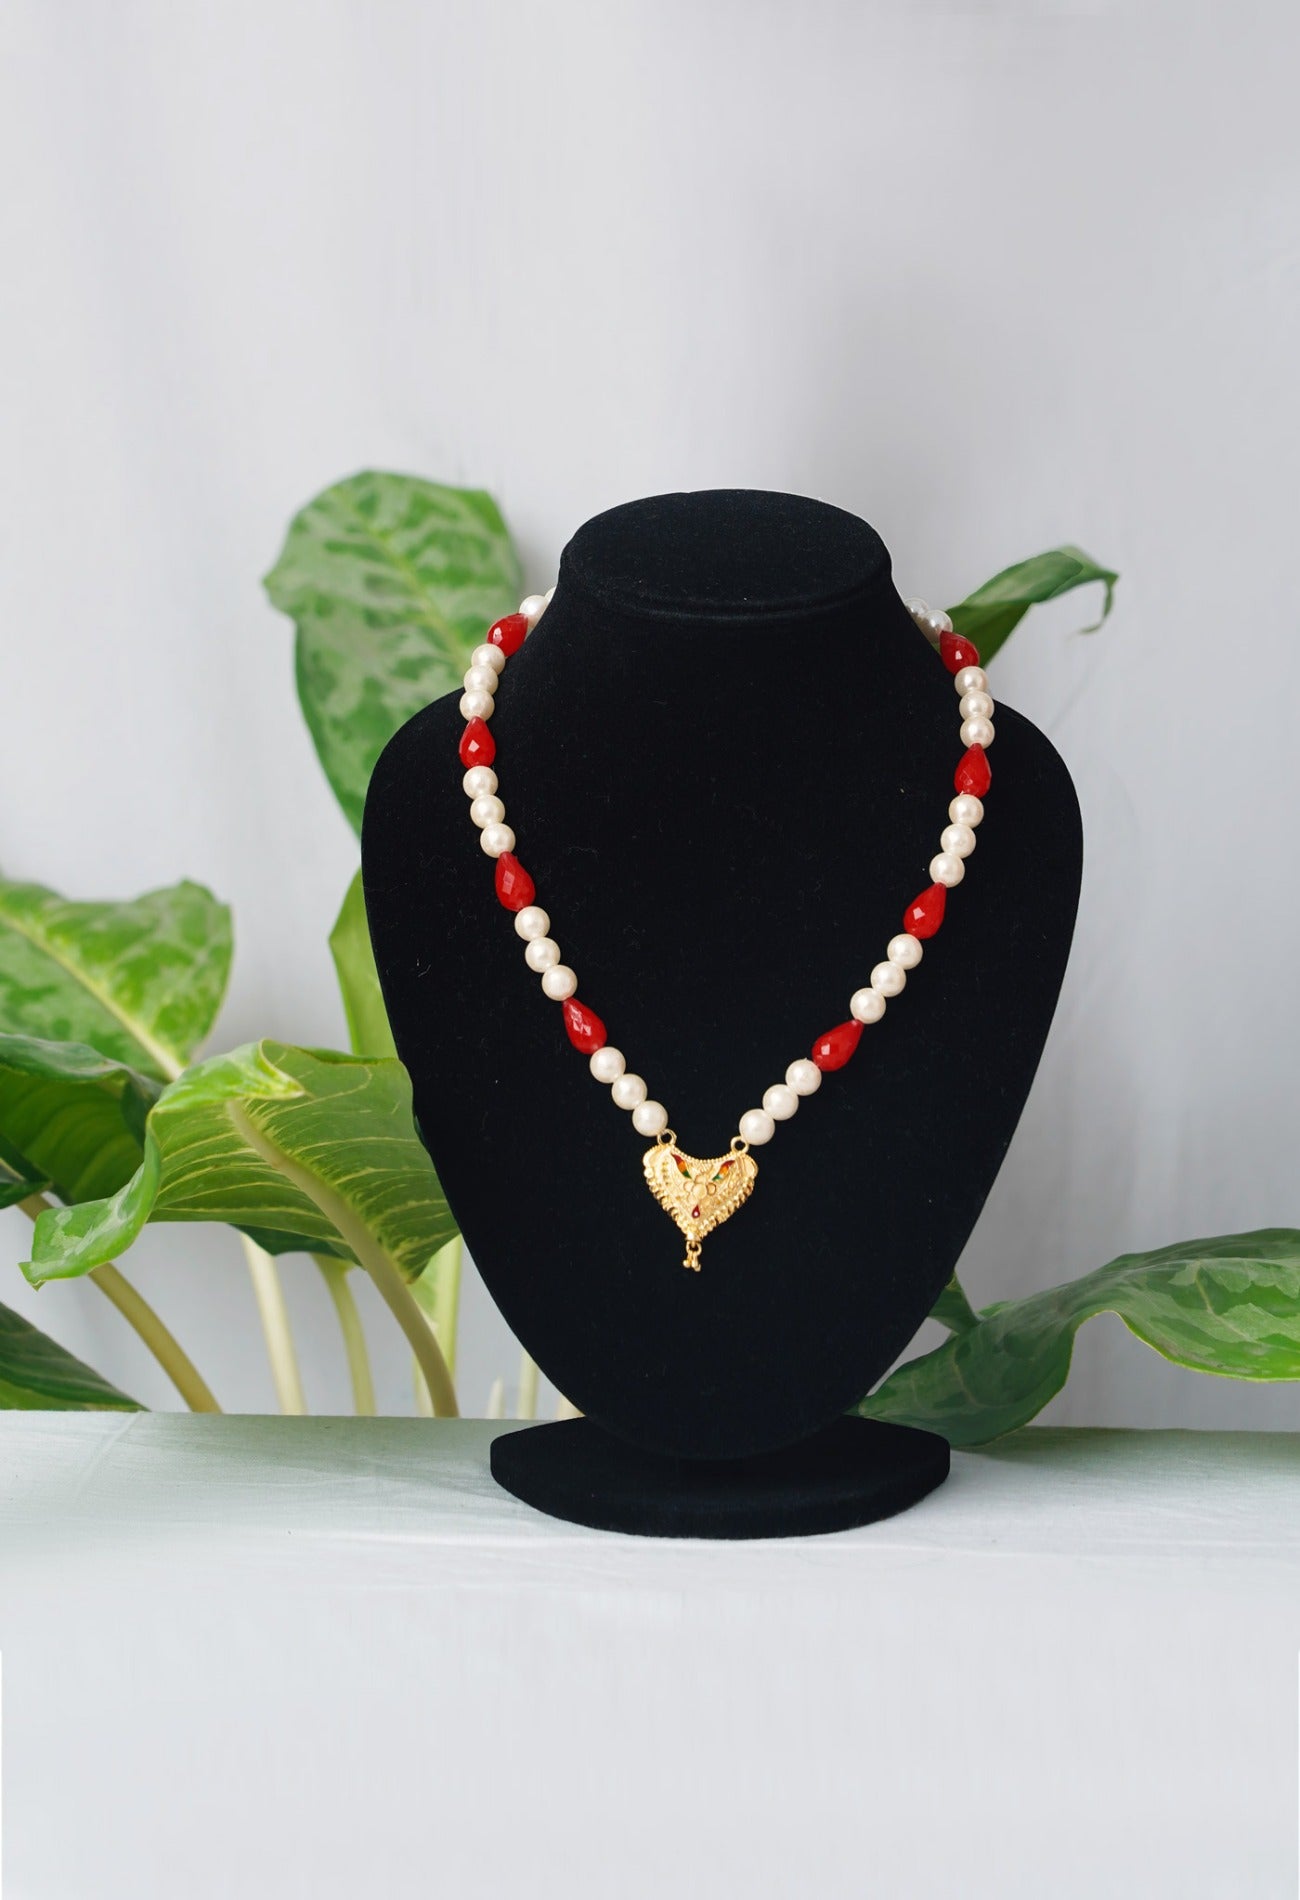 Online Shopping for Multi Amravati oval Beads Necklace with Pendent with jewellery from Andhra Pradesh at Unnatisilks.com India
